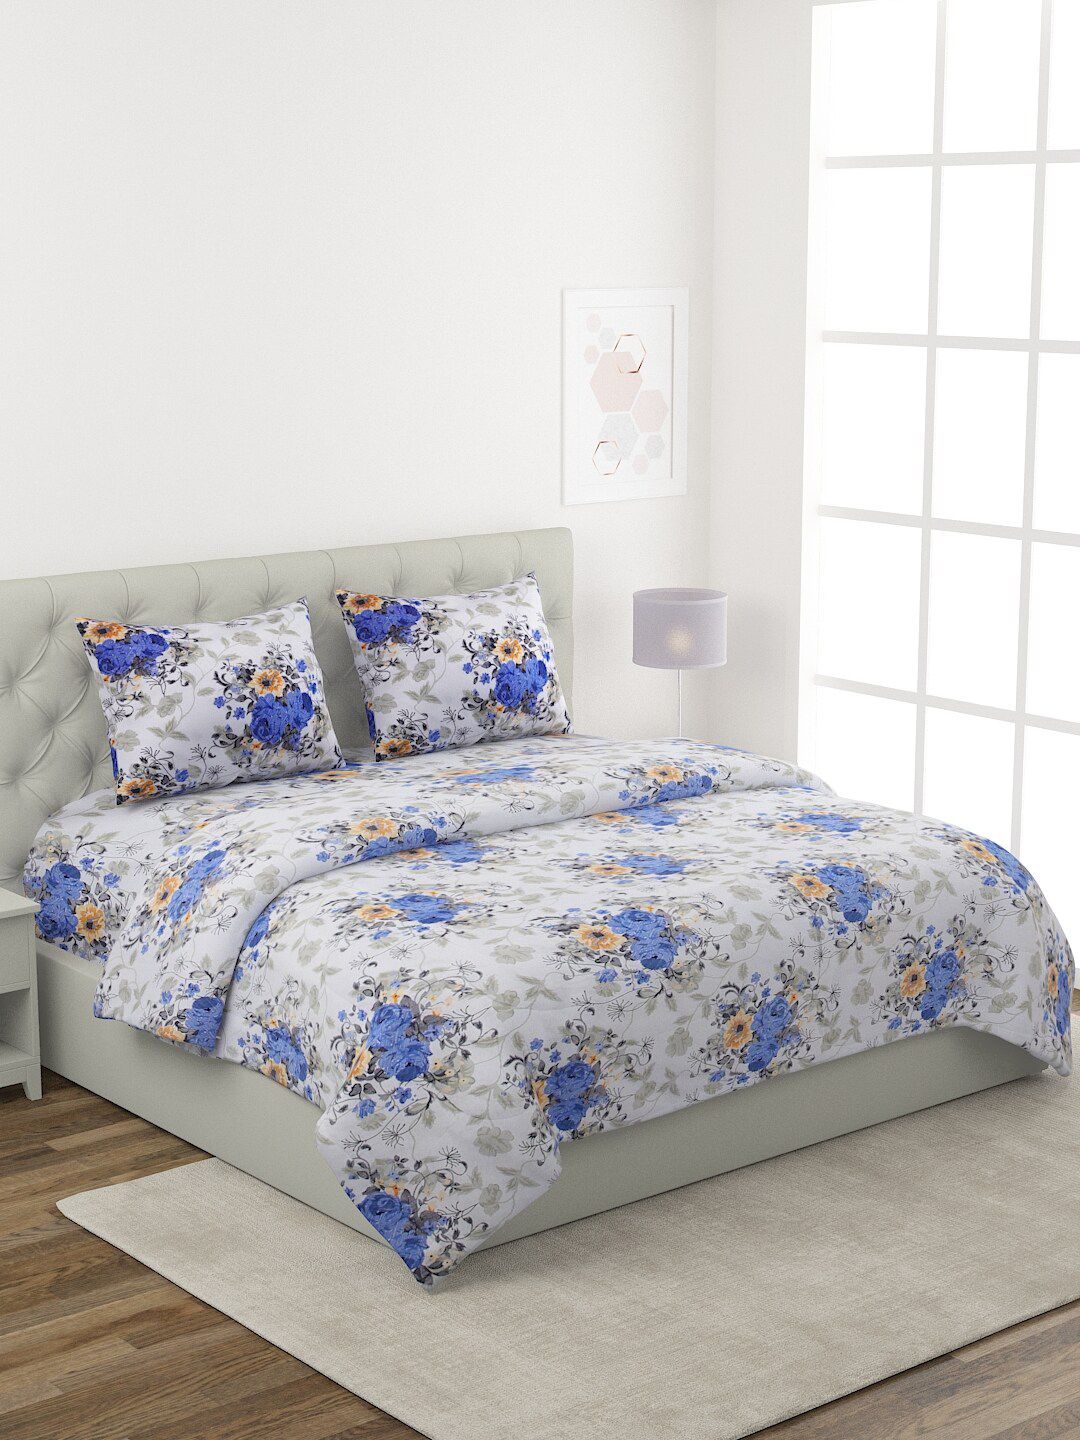 ROMEE White & Grey Floral Printed Pure Cotton Double King Bedding Set Price in India